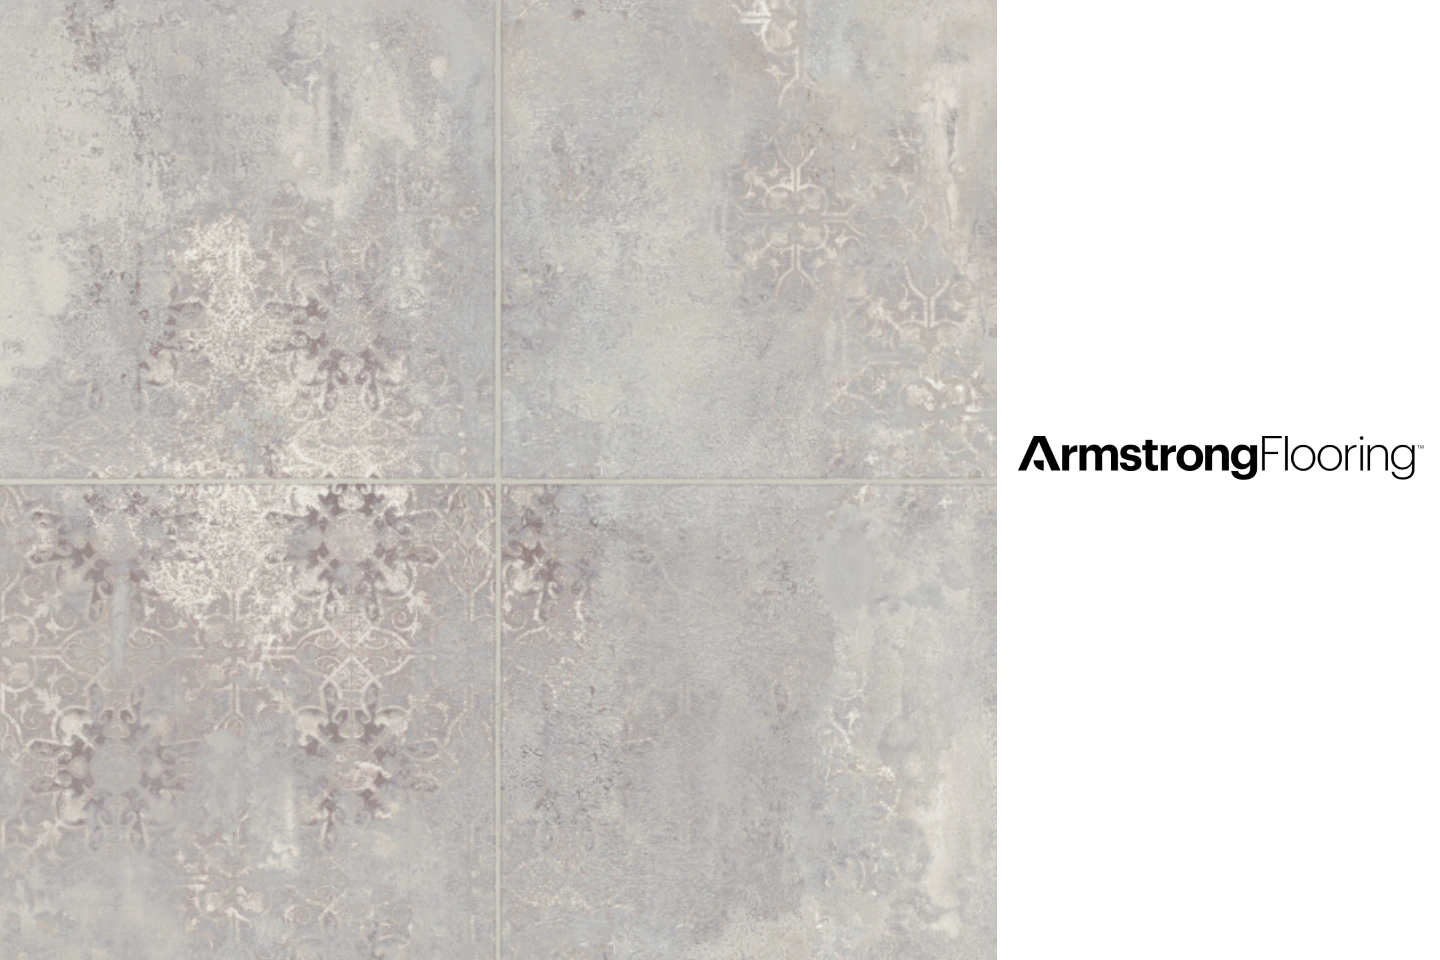 Advantages of Armstrong flooring: